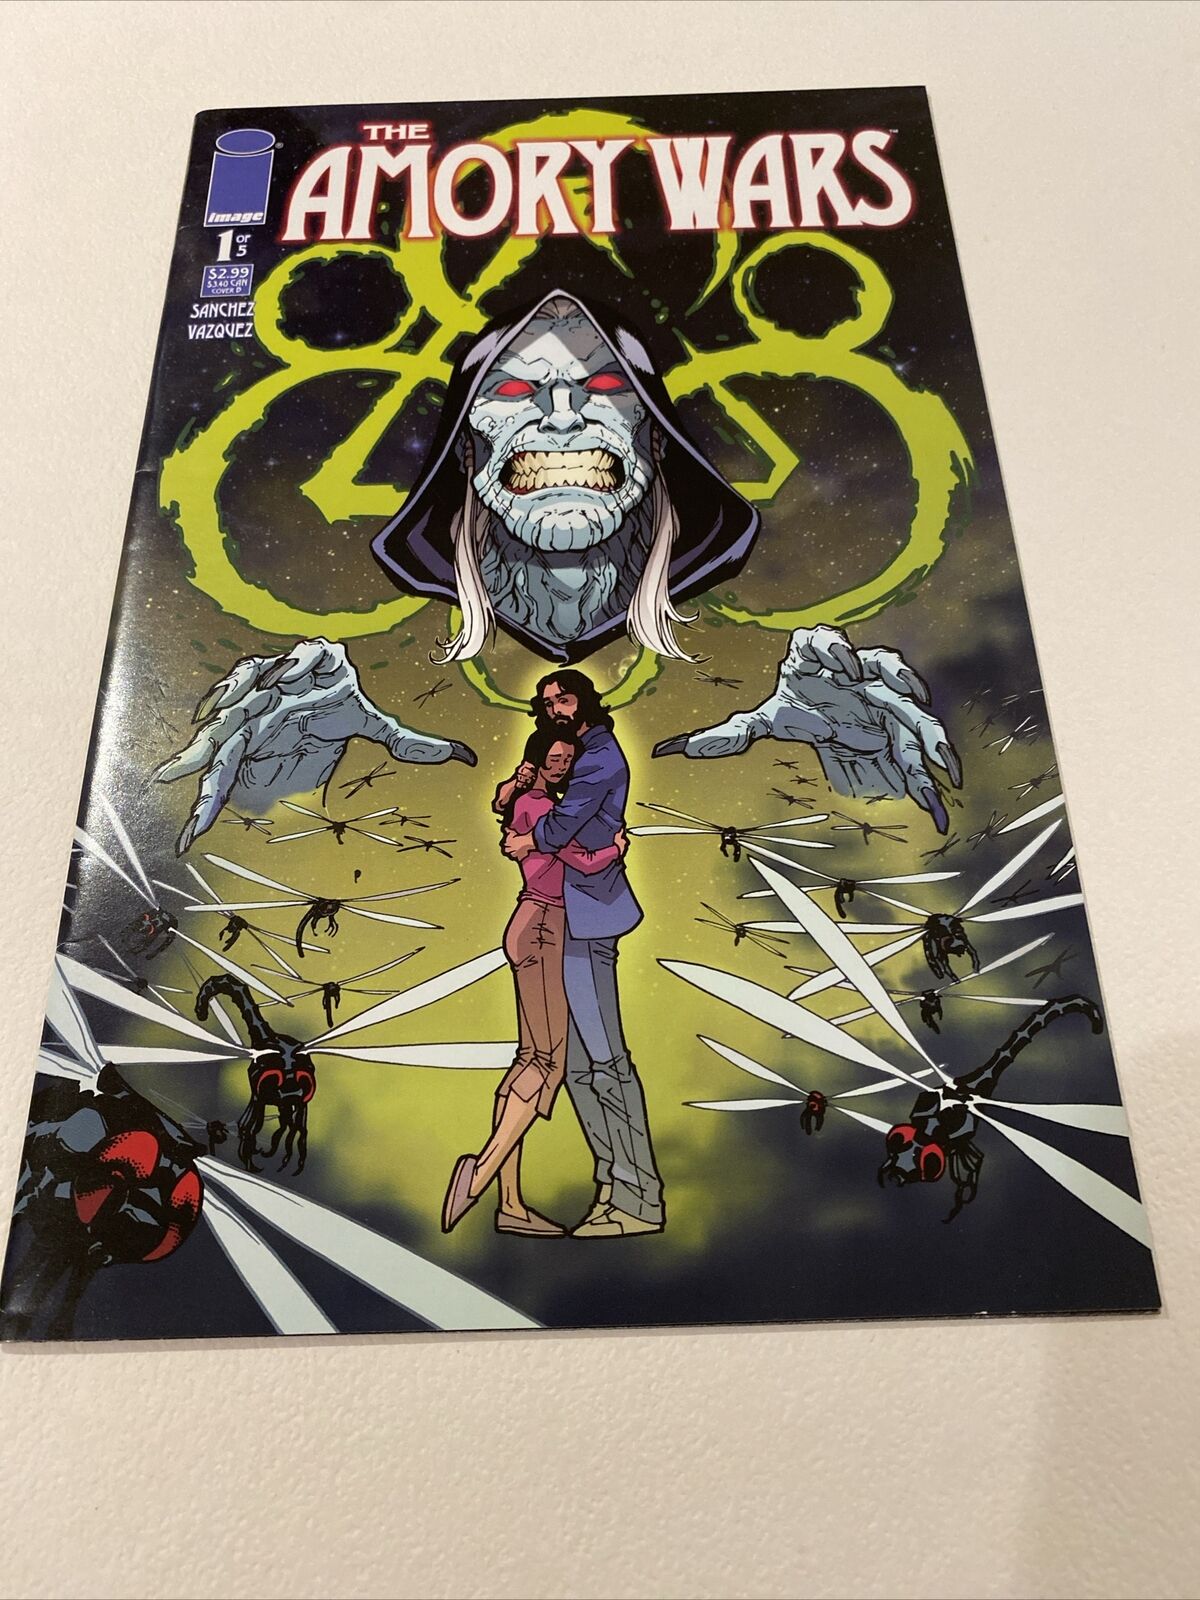 The Amory Wars Vol. 1 Issue 1 Variant Cover B Rare HTF Gemini Mailer